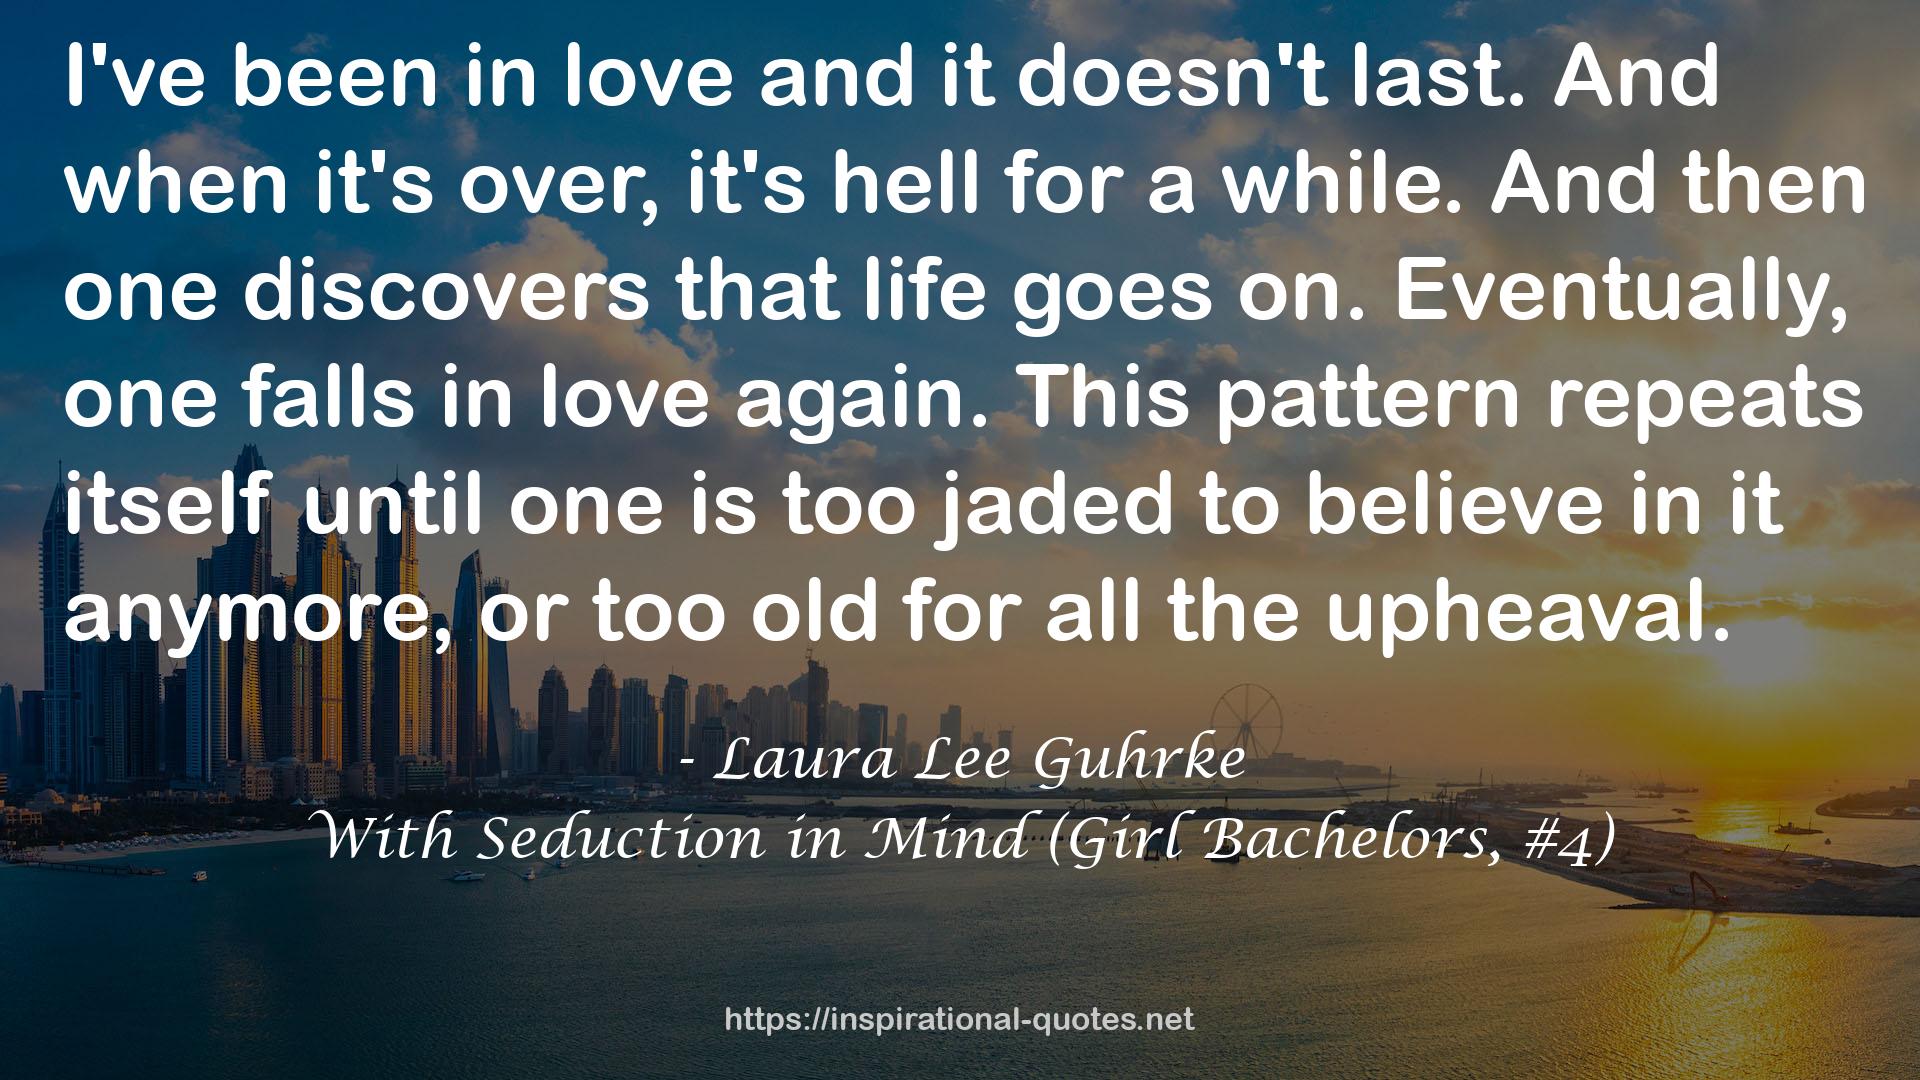 With Seduction in Mind (Girl Bachelors, #4) QUOTES